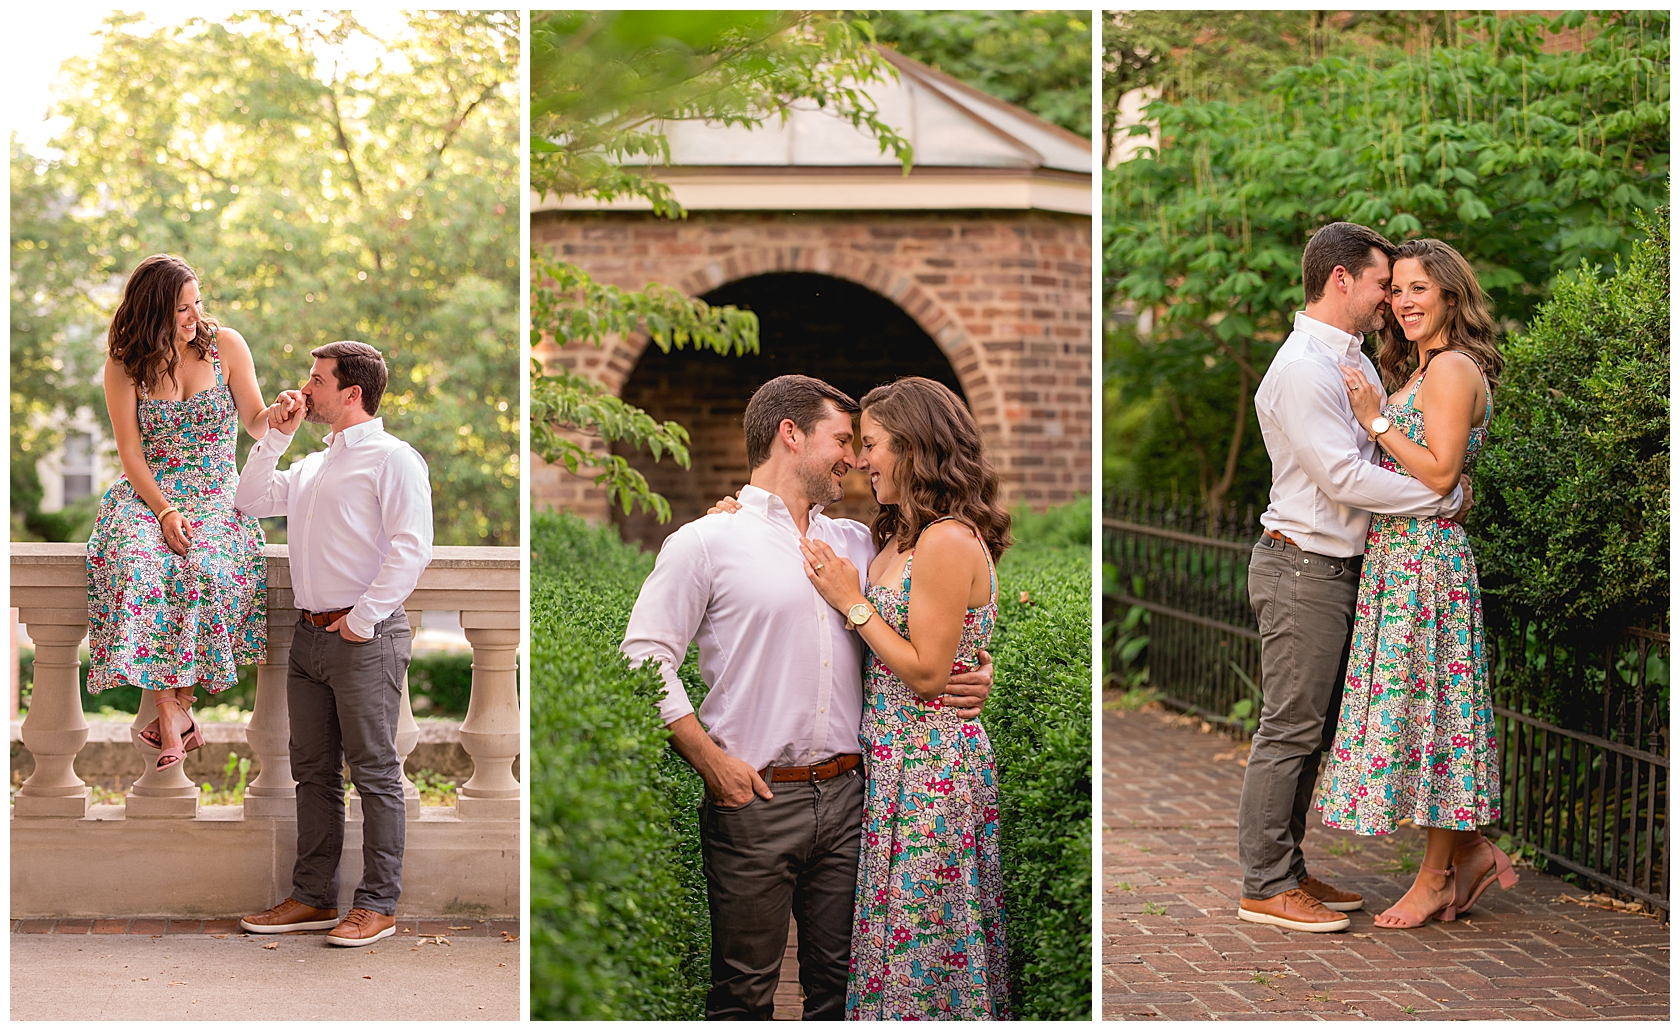 Lexington Kentucky Wedding Photographer at a Summer Engagement Session at Gratz Park by Kevin and Anna Photography